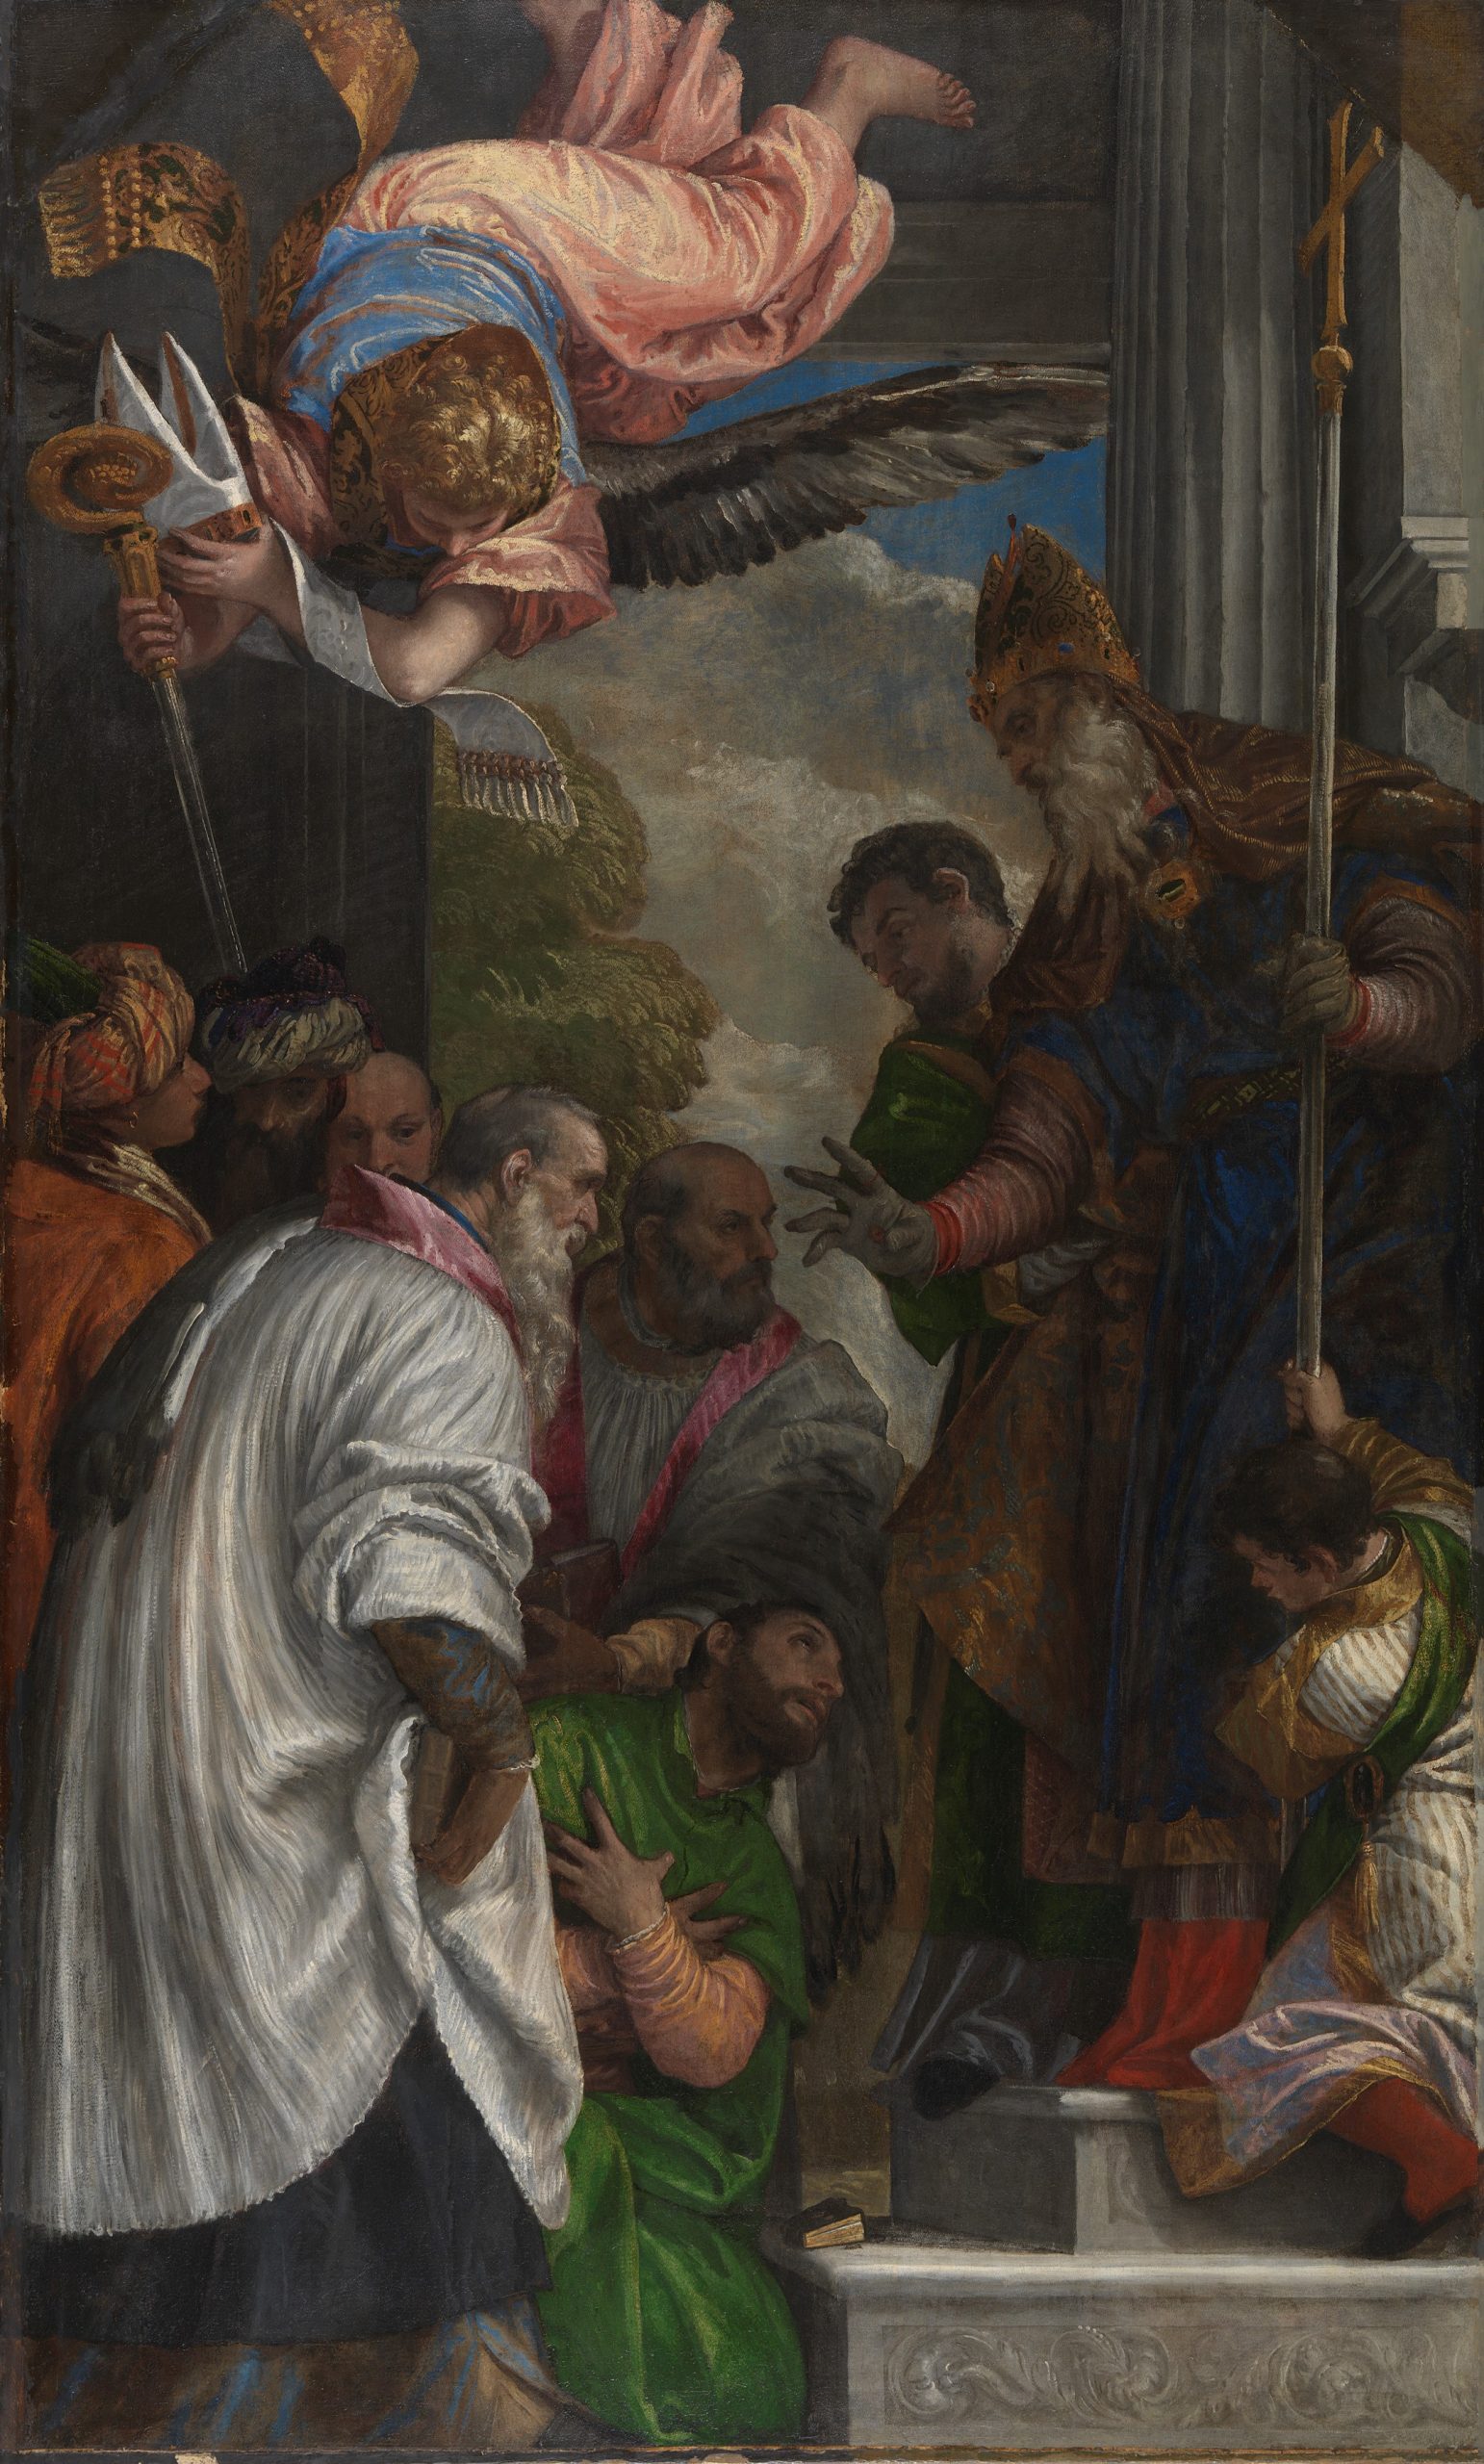 Paolo Veronese The Consecration of Saint Nicholas, 1562 © The National Gallery, London